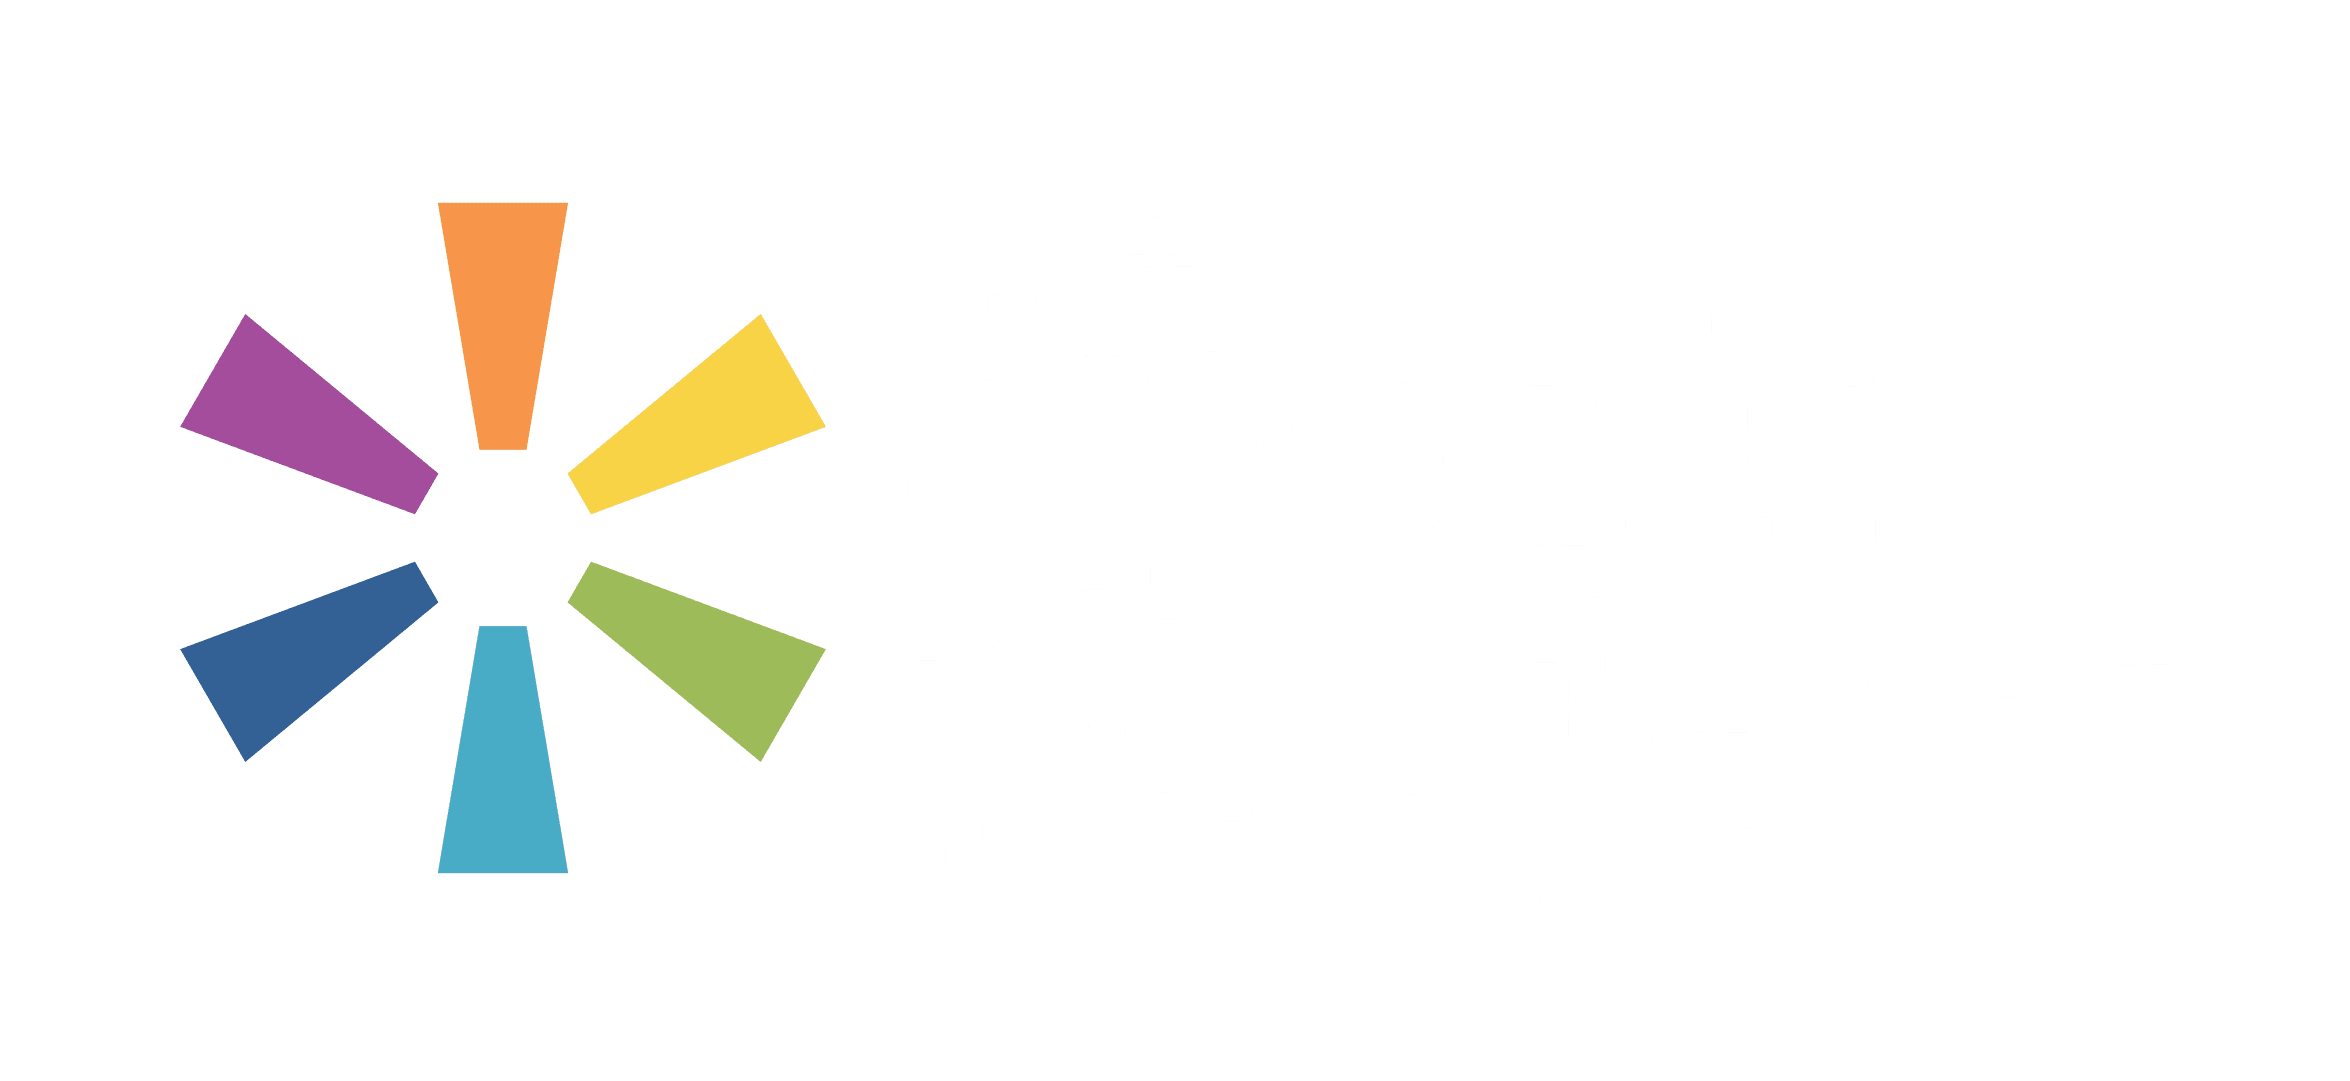 The Spark Project Manifesto